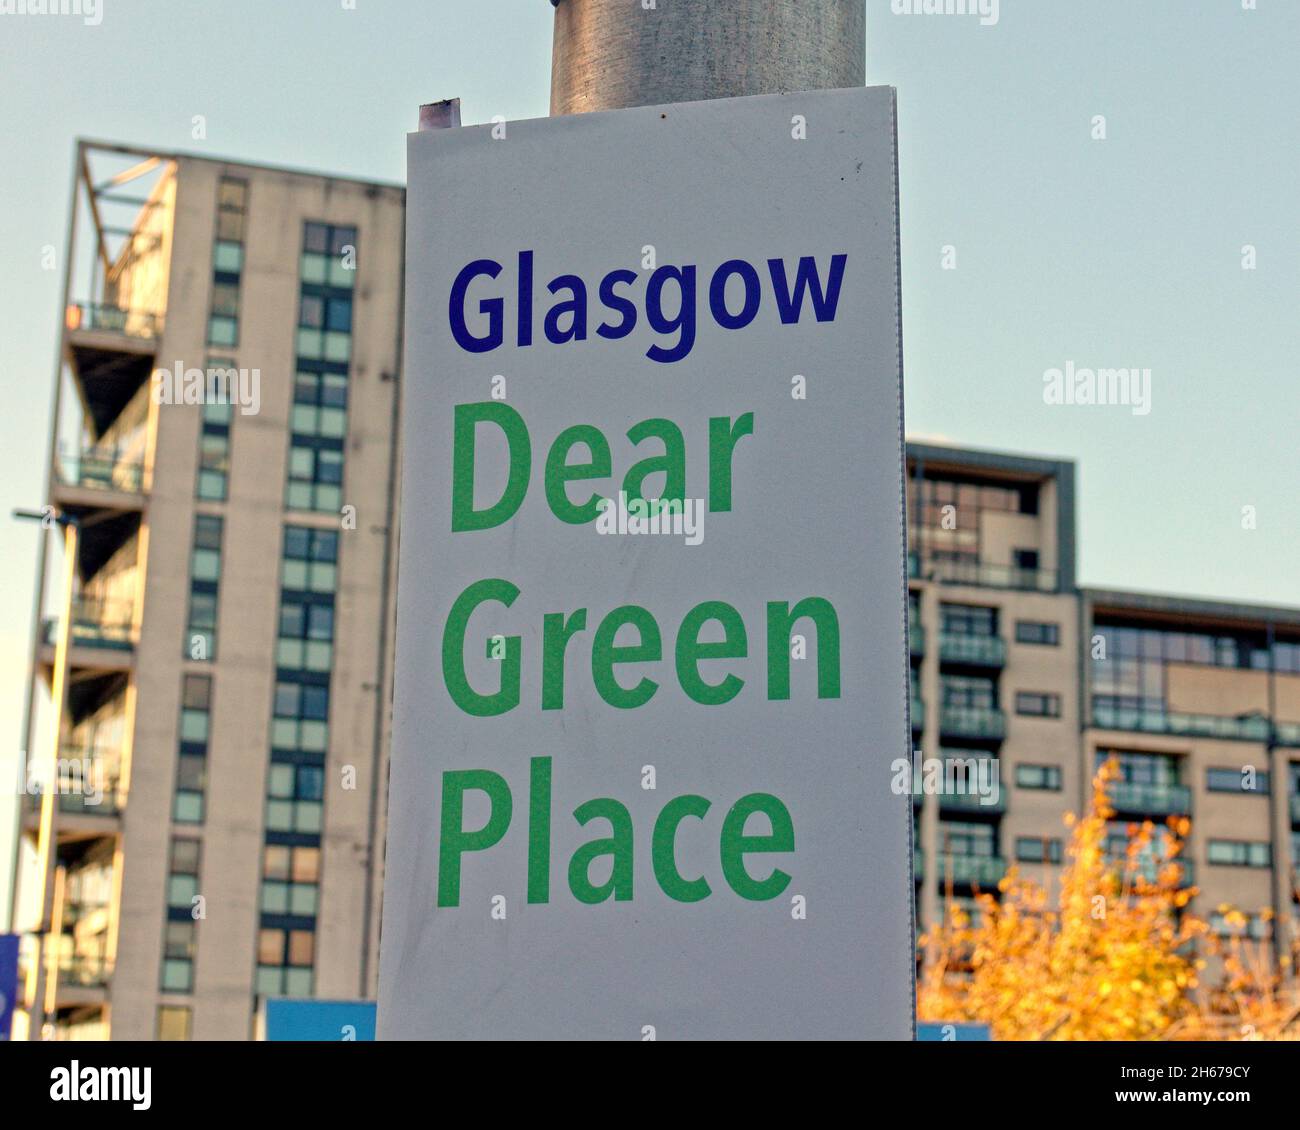 Glasgow, Scotland, UK  13th November, 2021.  Cop 26 ends and quieter streets and a diminished police presence brought some more normality to the city with less activity  to match the sunshine and blue sky. Credit  Gerard Ferry/Alamy Live News Stock Photo